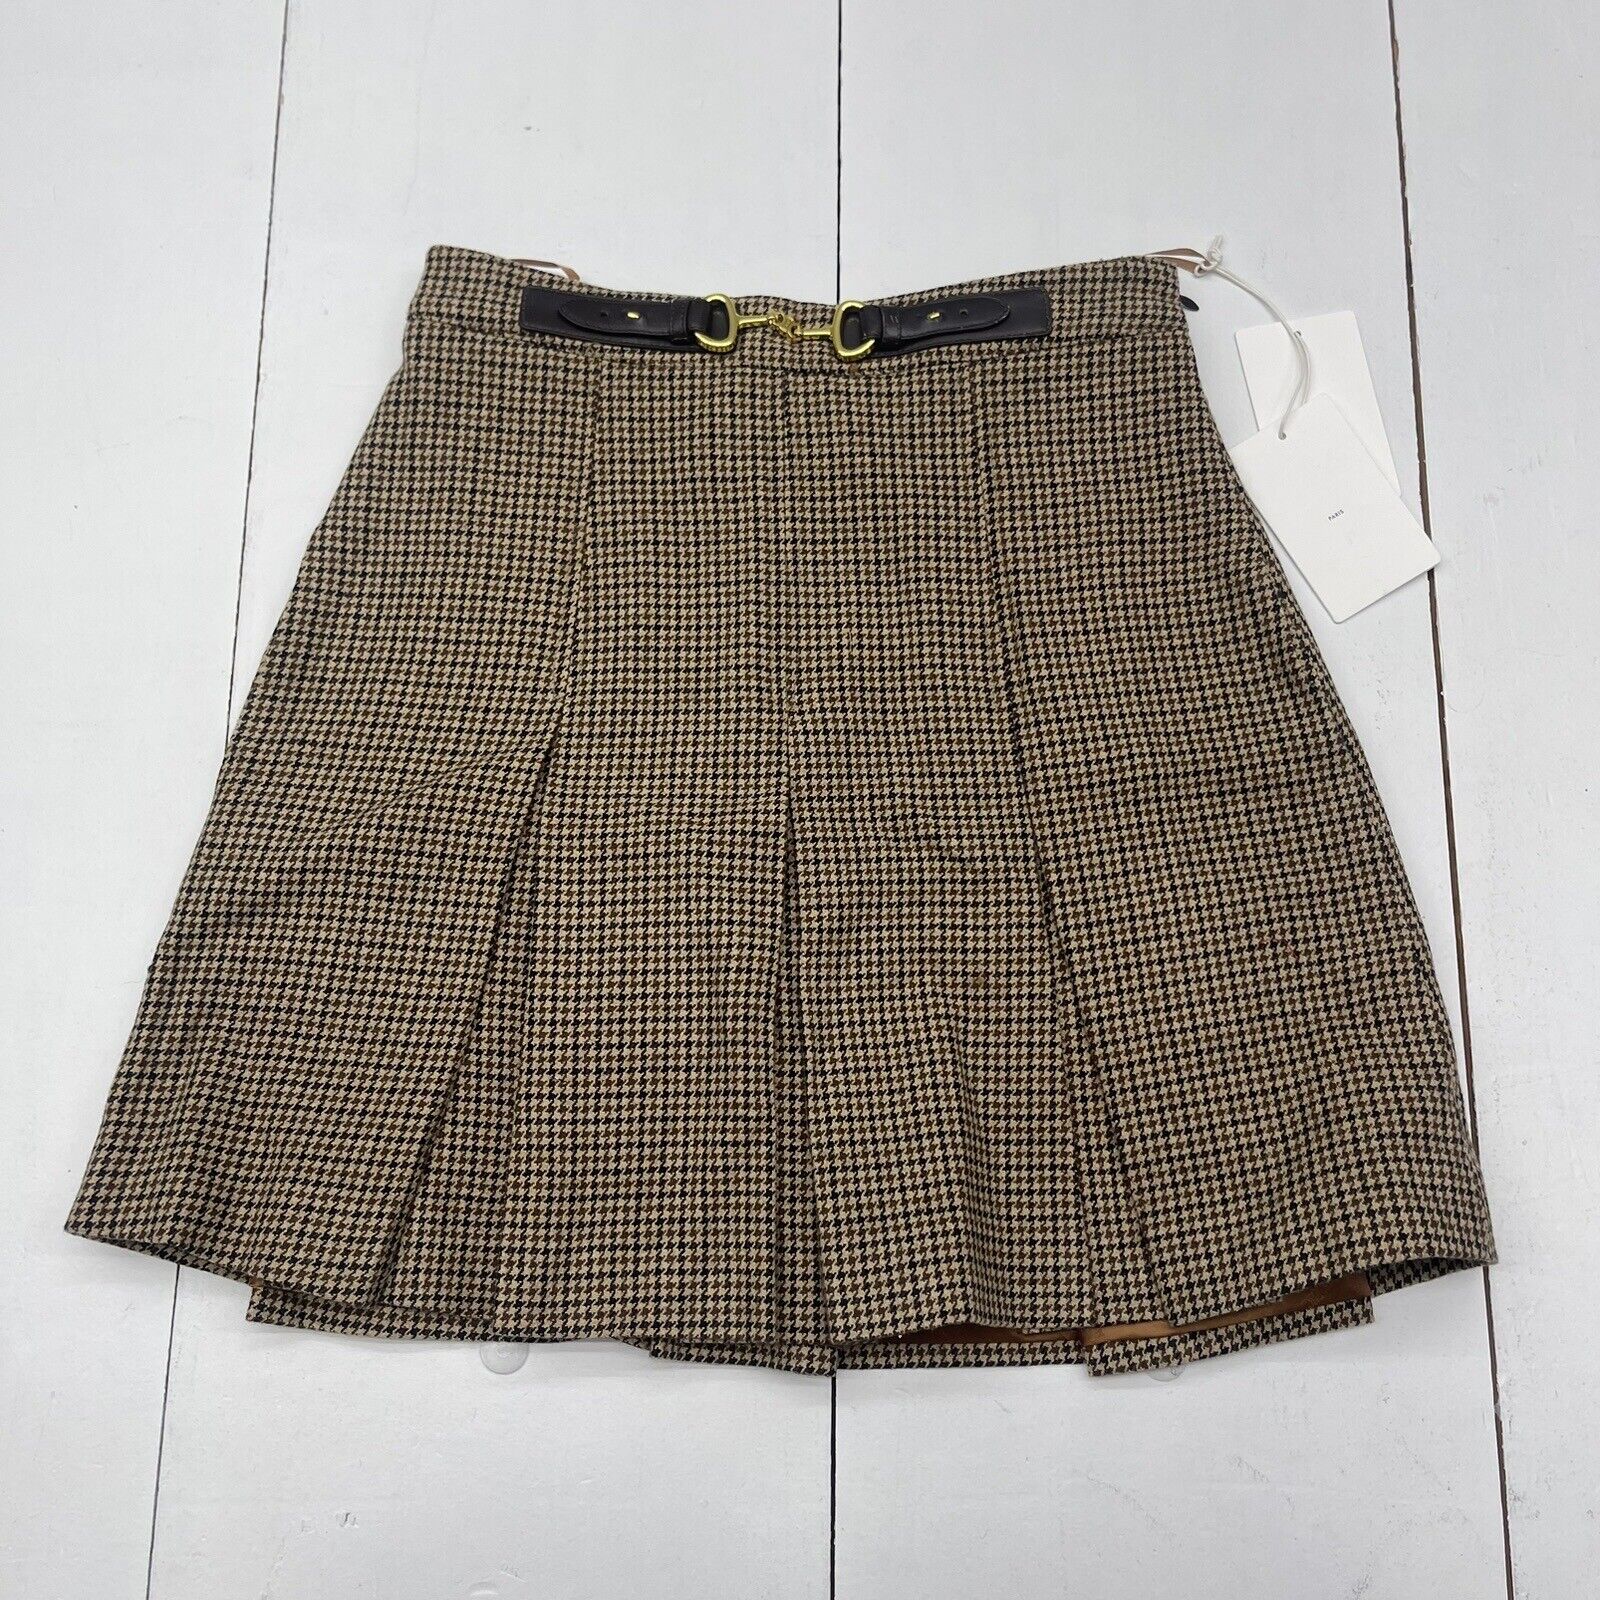 Harris Tweed Brown Houndstooth Pleated Skirt Women’s Size 42 New